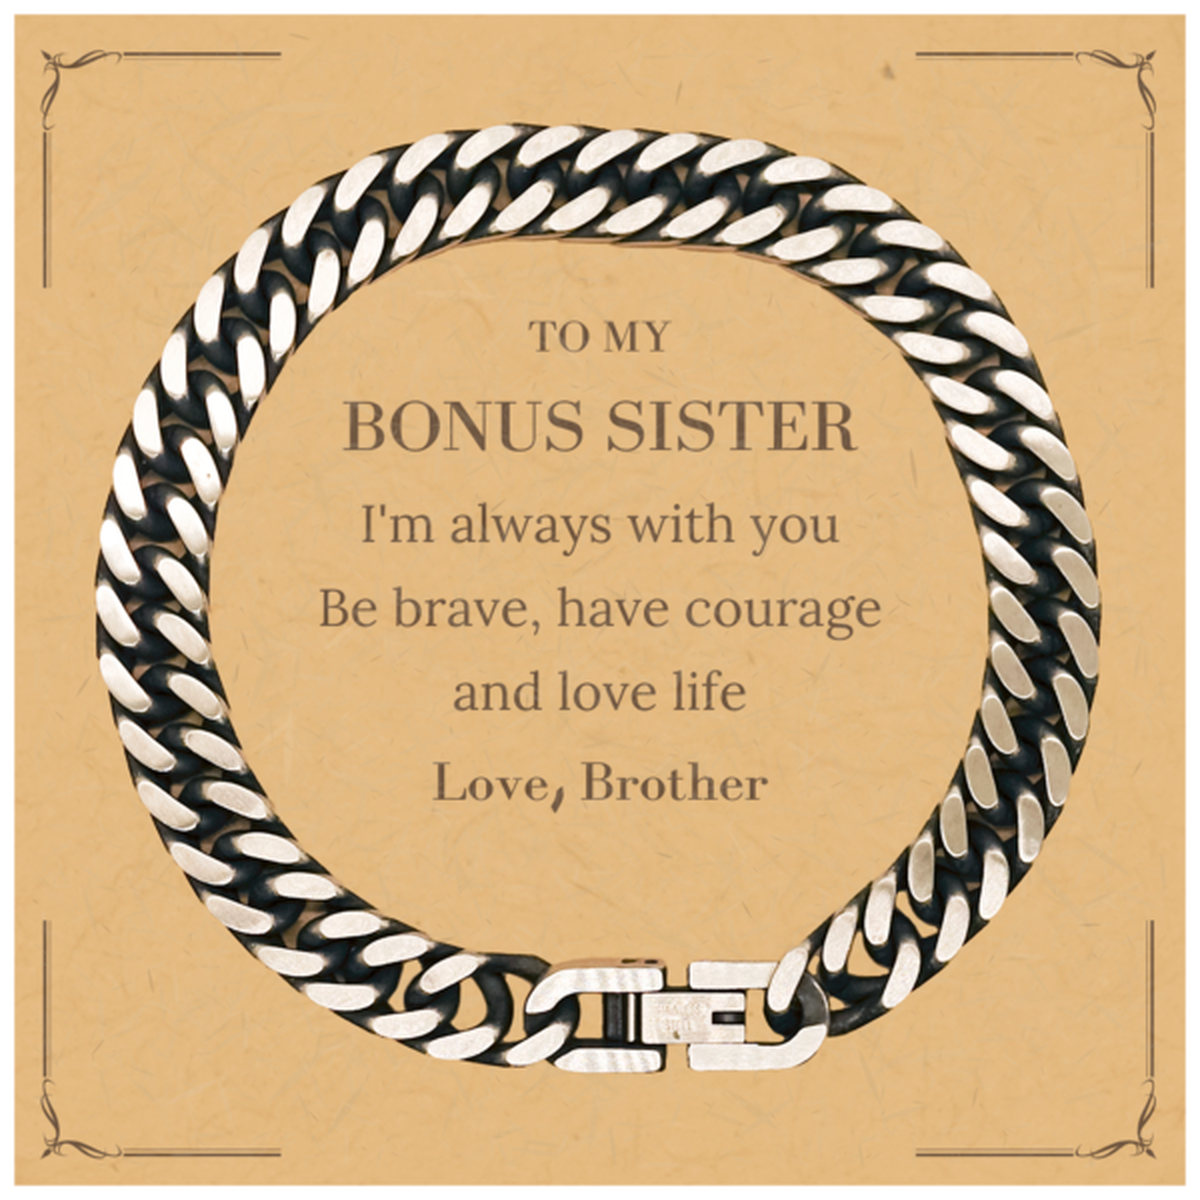 To My Bonus Sister Gifts from Brother, Unique Cuban Link Chain Bracelet Inspirational Christmas Birthday Graduation Gifts for Bonus Sister I'm always with you. Be brave, have courage and love life. Love, Brother